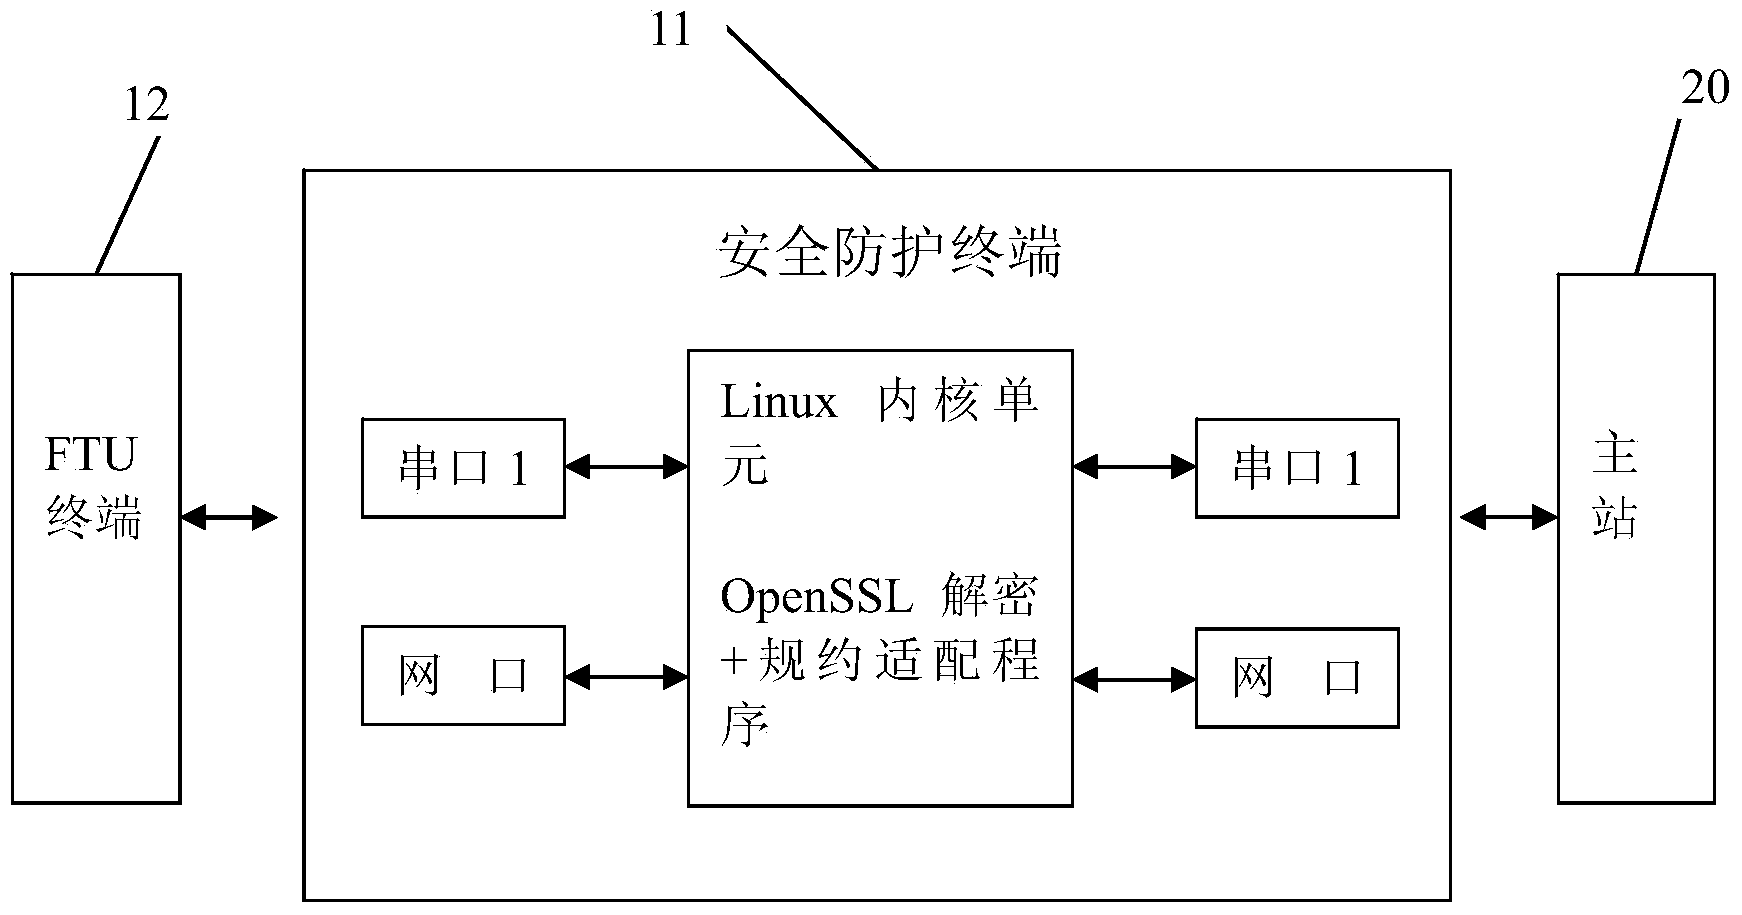 Encryption remote control system of power distribution network